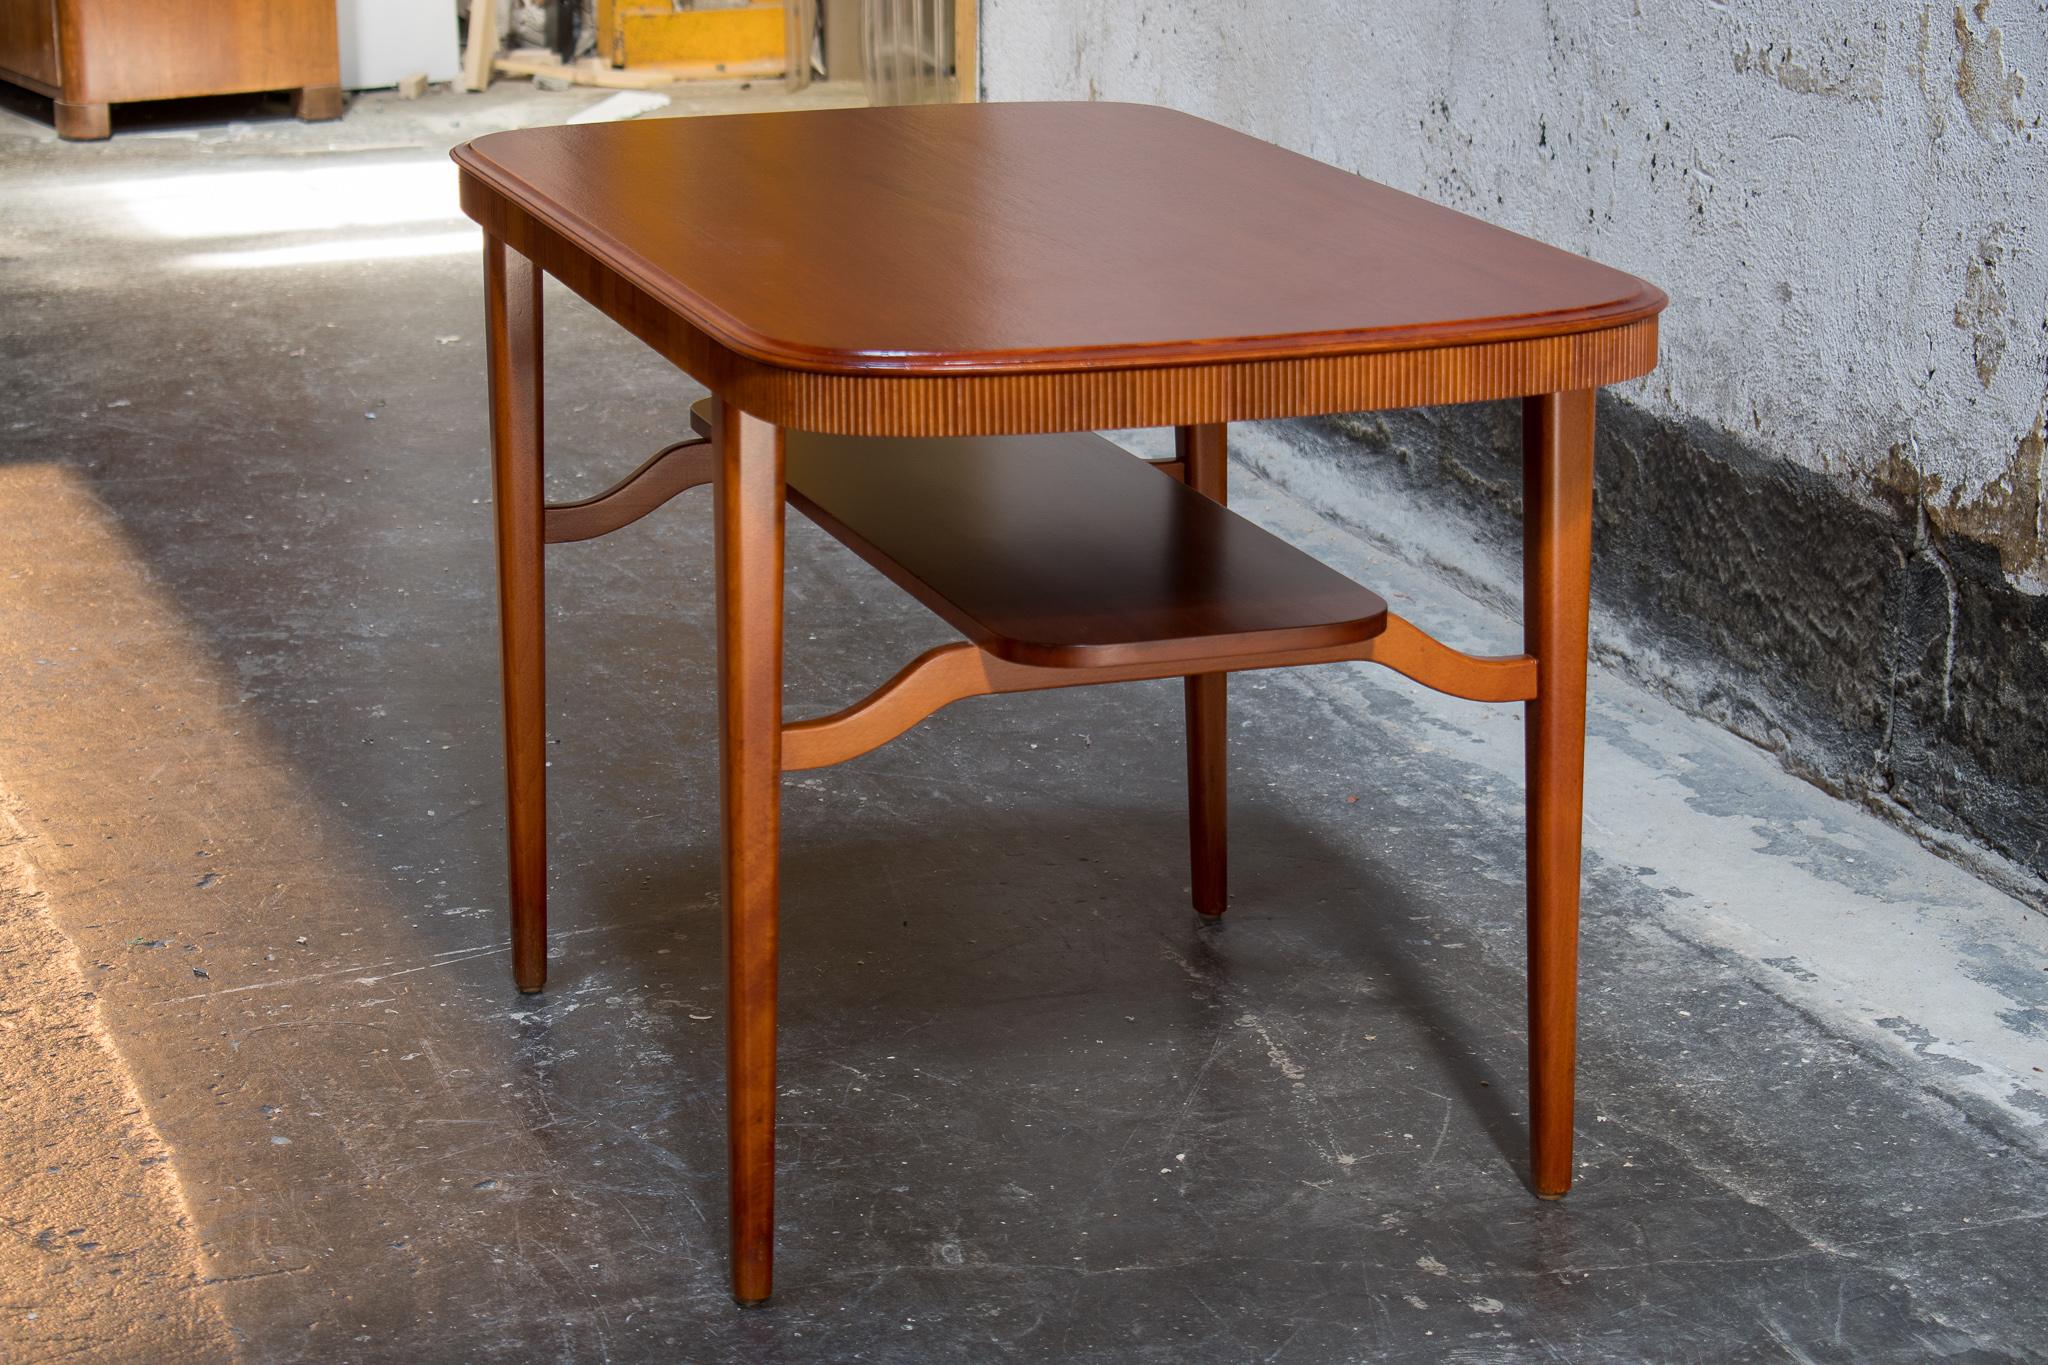 Mid-Century Modern Mahogany End or Coffee Table with Shelf, Sweden, c. 1950 In Good Condition For Sale In Atlanta, GA